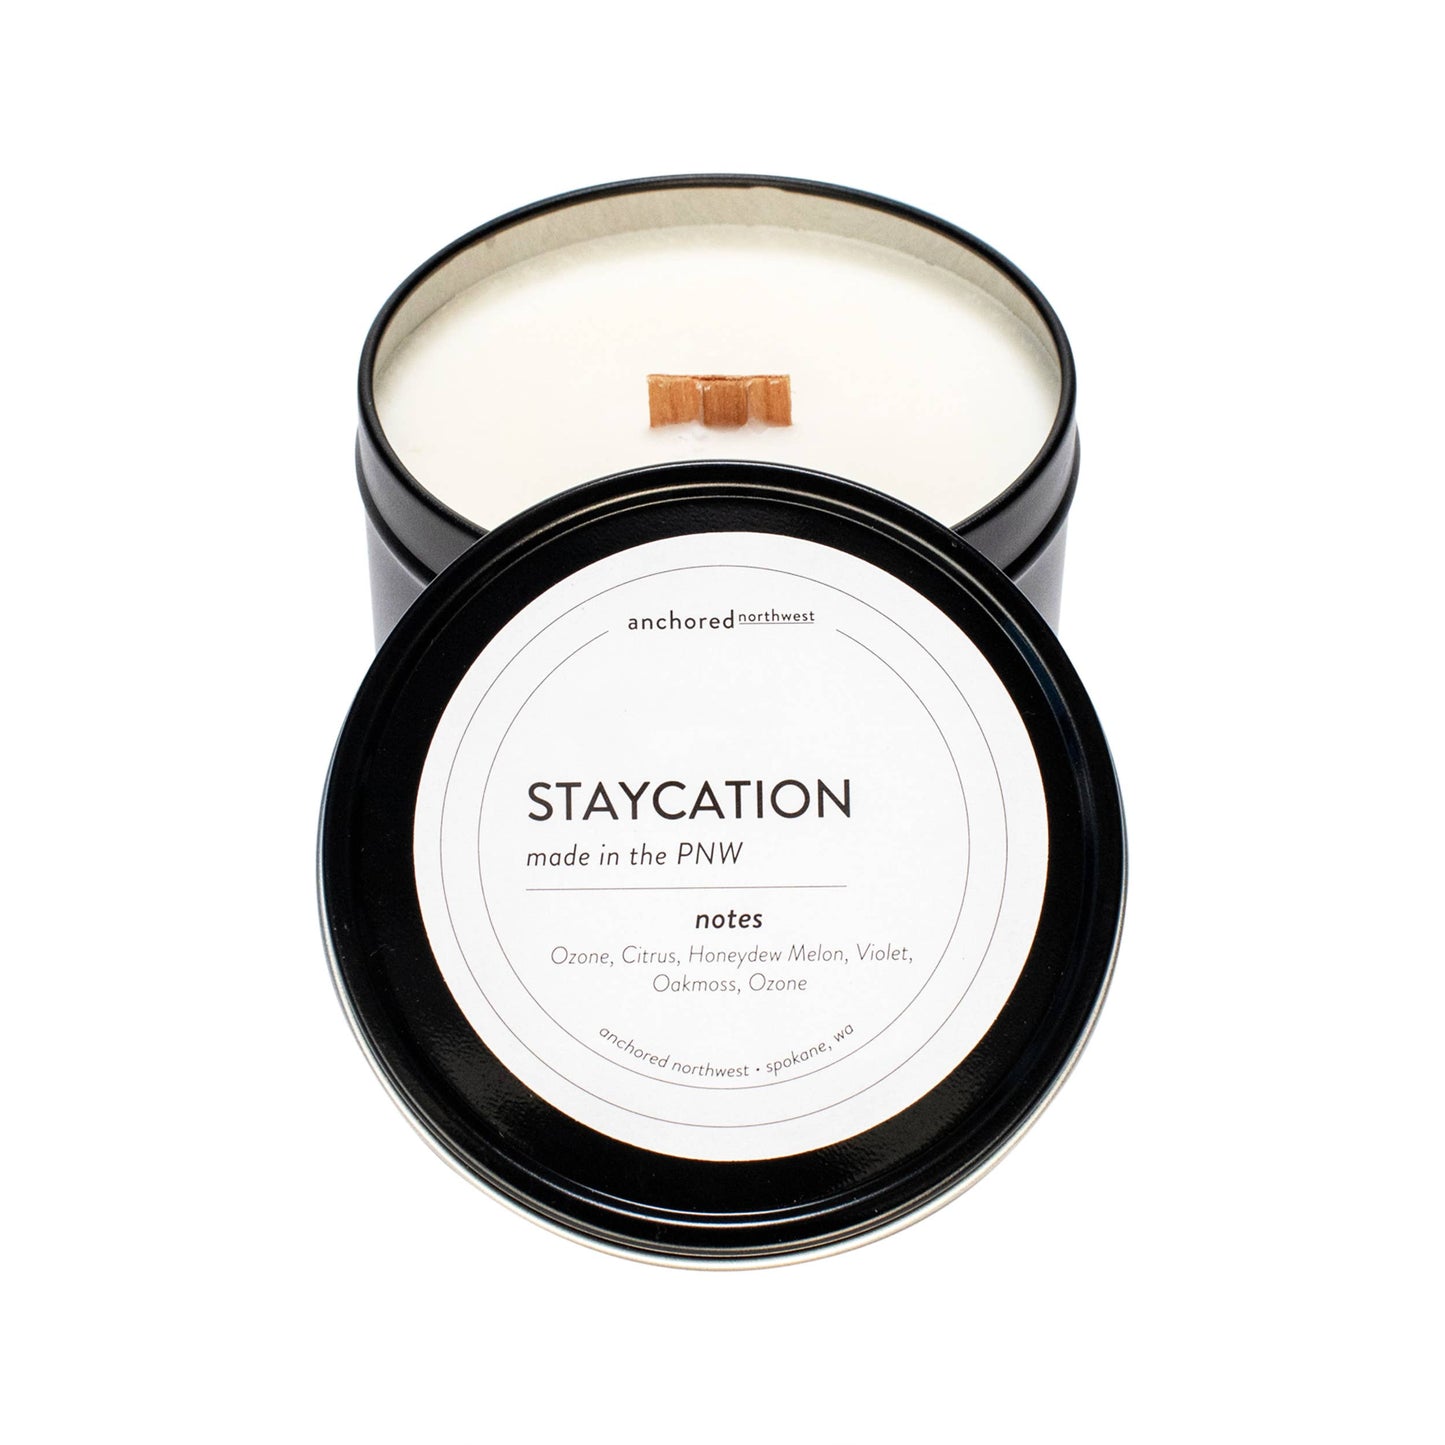 Staycation Wood Wick Travel Soy Candle